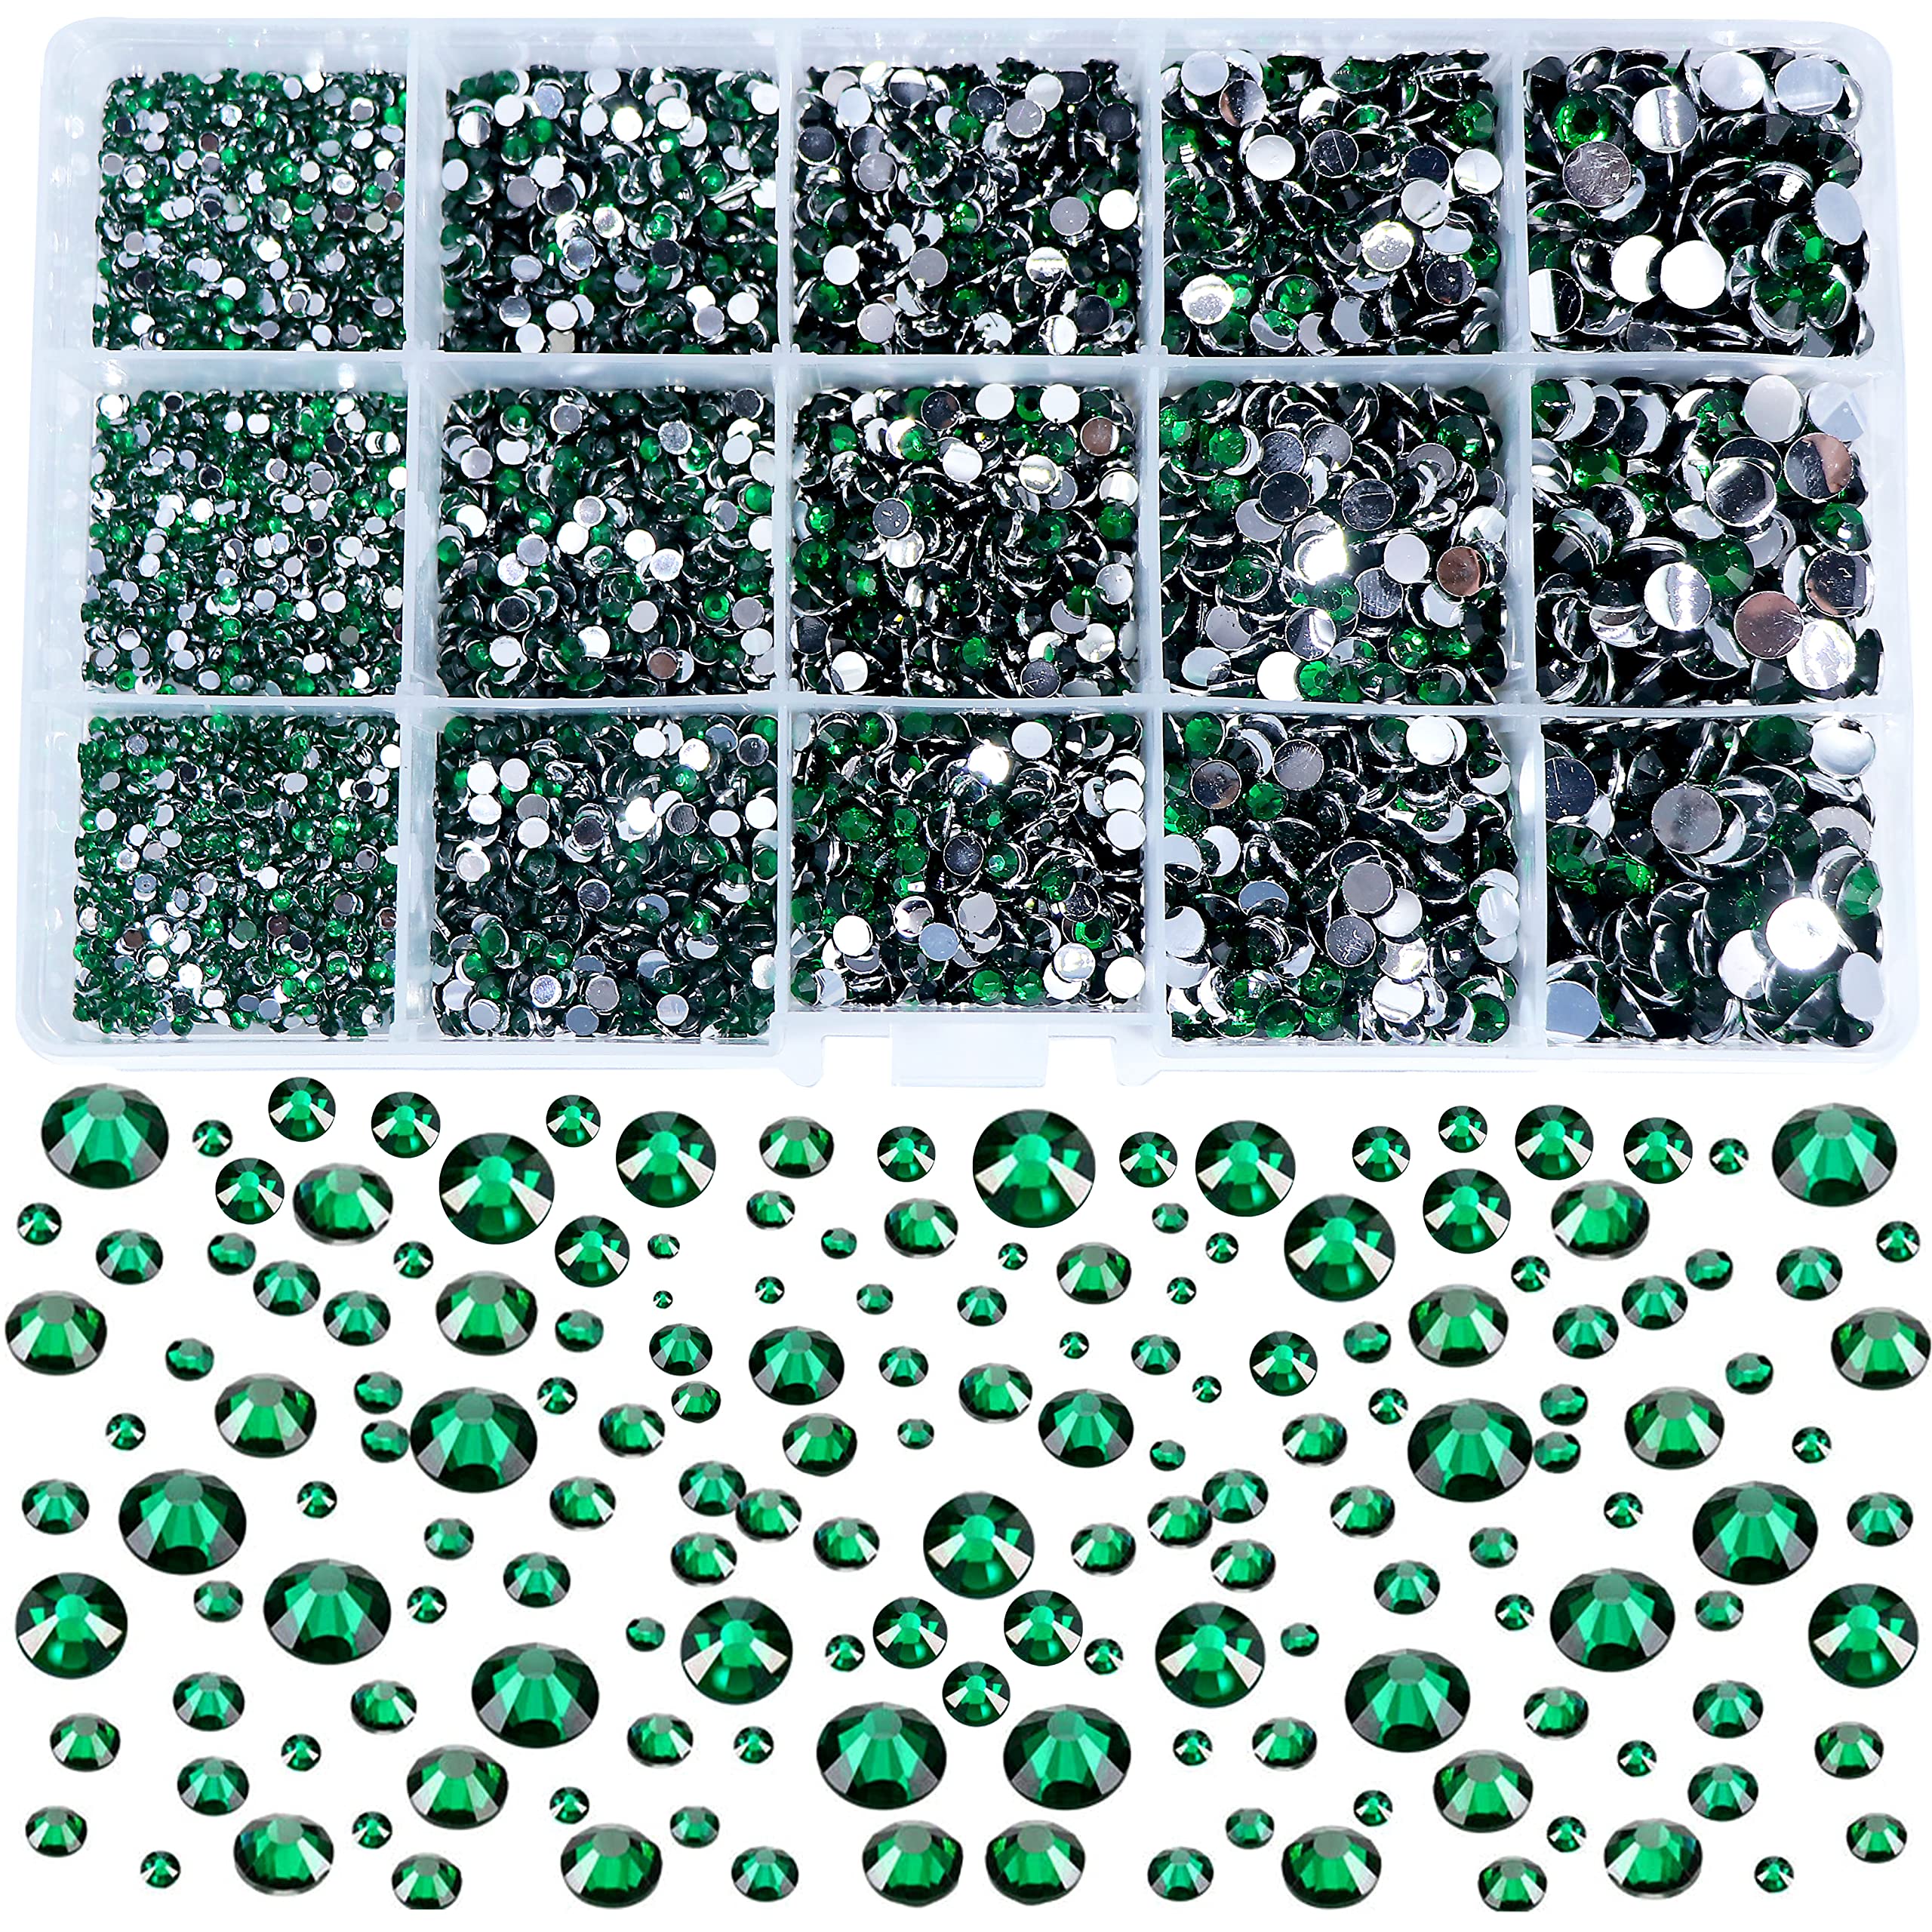 FULZTEY 7500Pcs Emerald Green Nail Art Rhinestones for Nails 2 3 4 5 6.5MM  Crystals Diamond Flatback Gems Stones Round Green Crystal Rhinestones for  Crafts Nail Design Charms DIY Clothes Shoes Jewelry S5